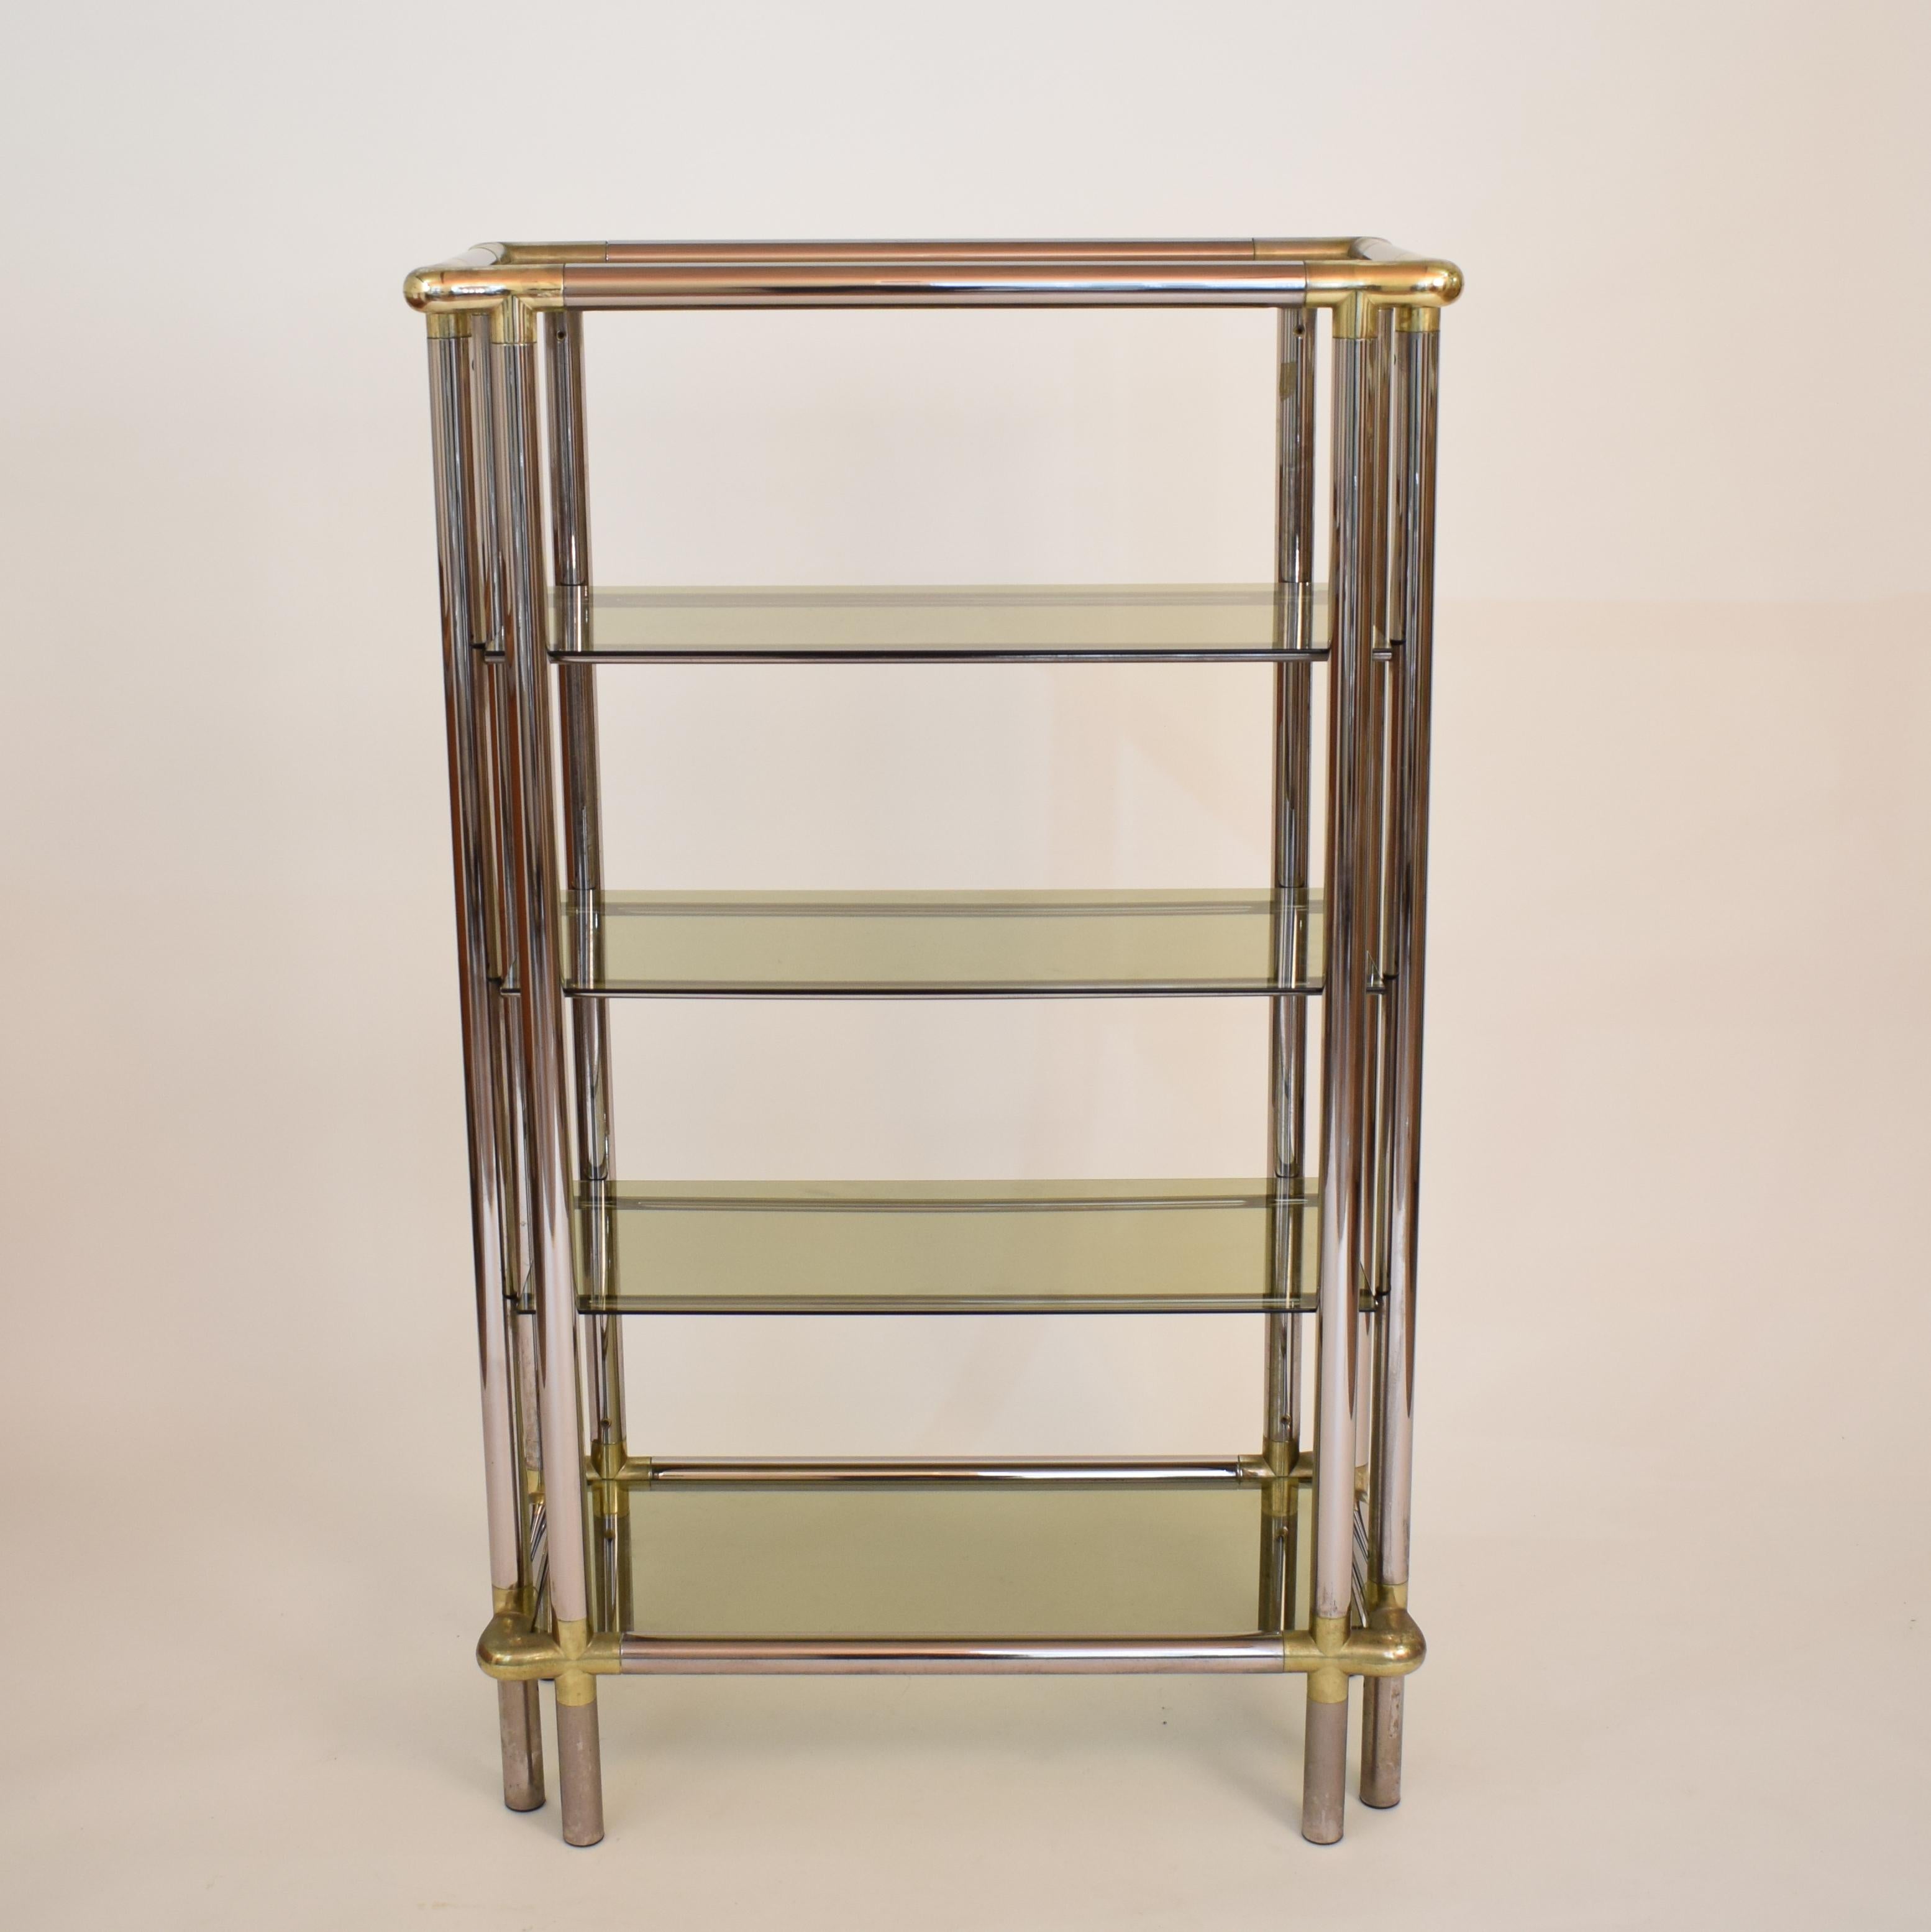 Midcentury French Hollywood Regency Chrome Brass Étagère Display Glass Shelf In Good Condition For Sale In Berlin, DE